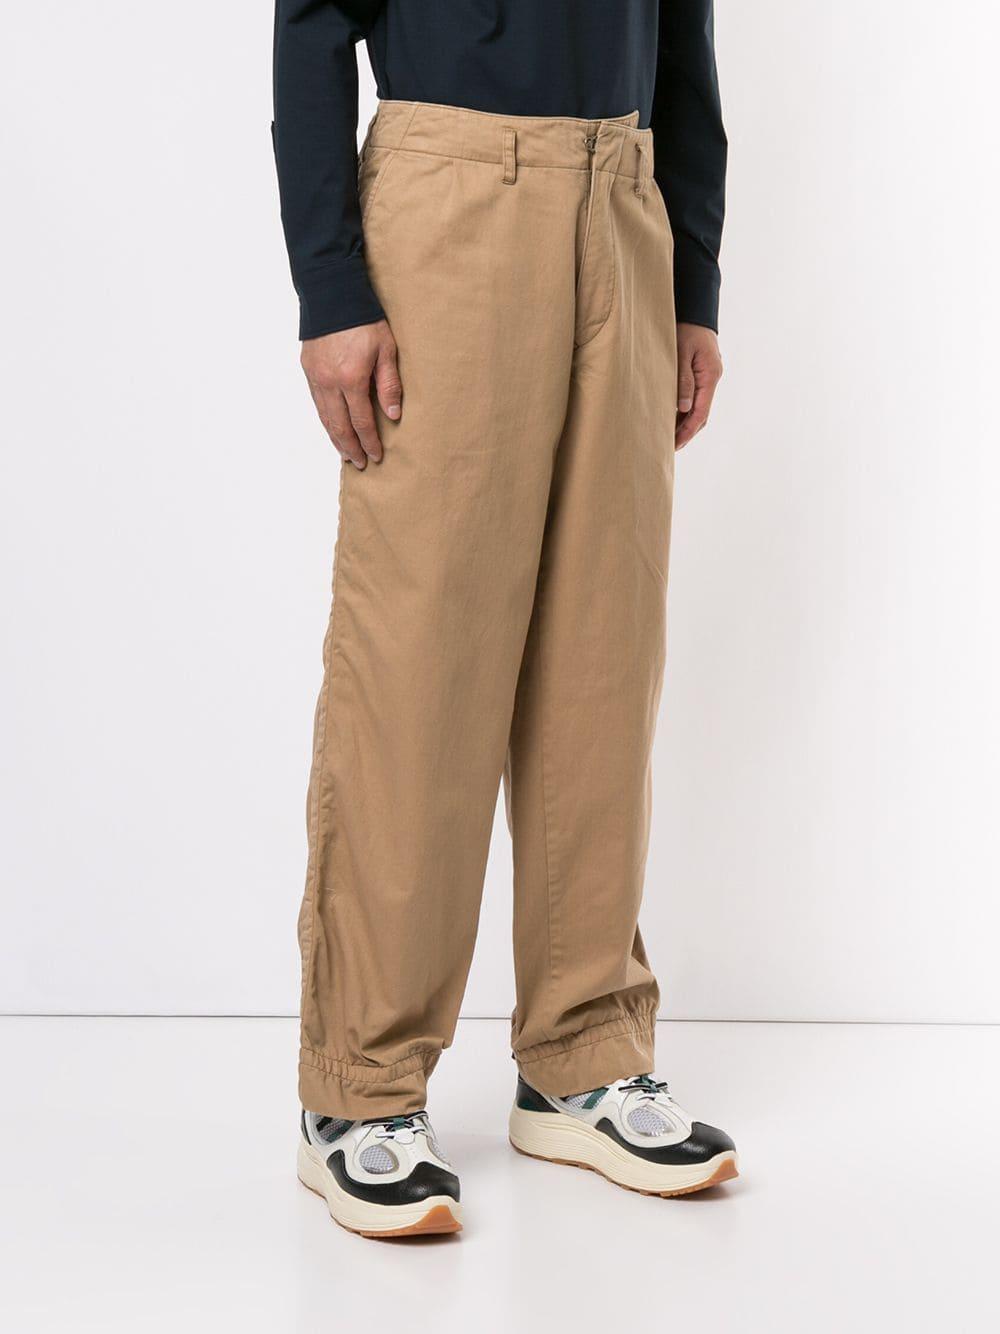 Kolor Cotton Oversized Chinos in Brown for Men - Lyst